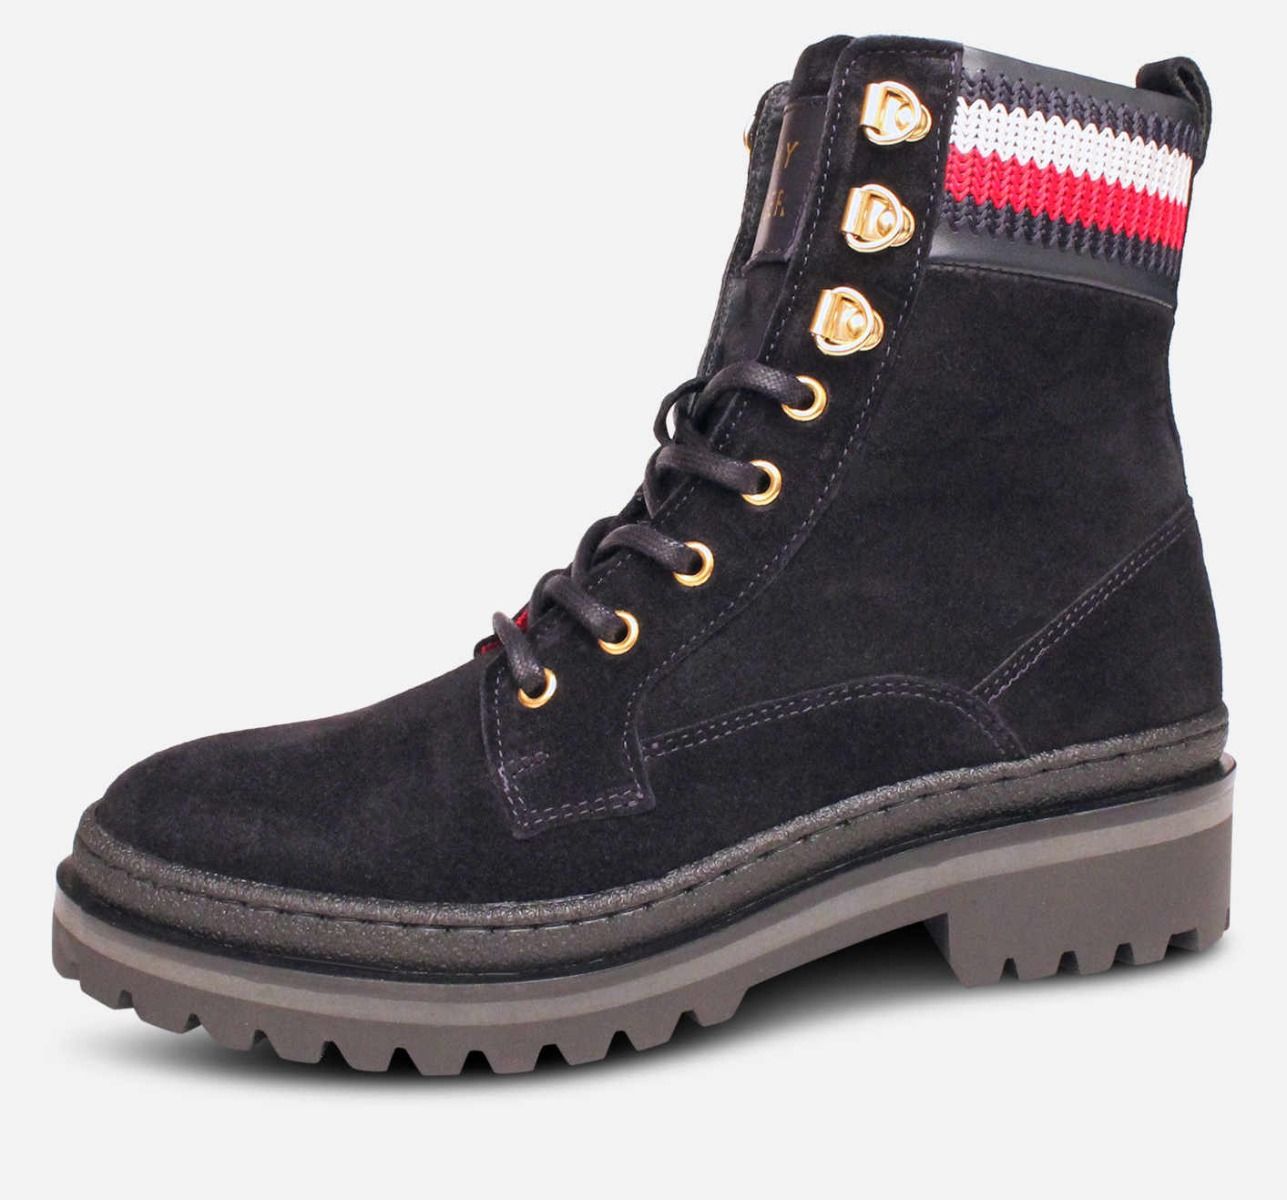 Tommy Hilfiger Dark Navy Blue Suede Lace Up Boots